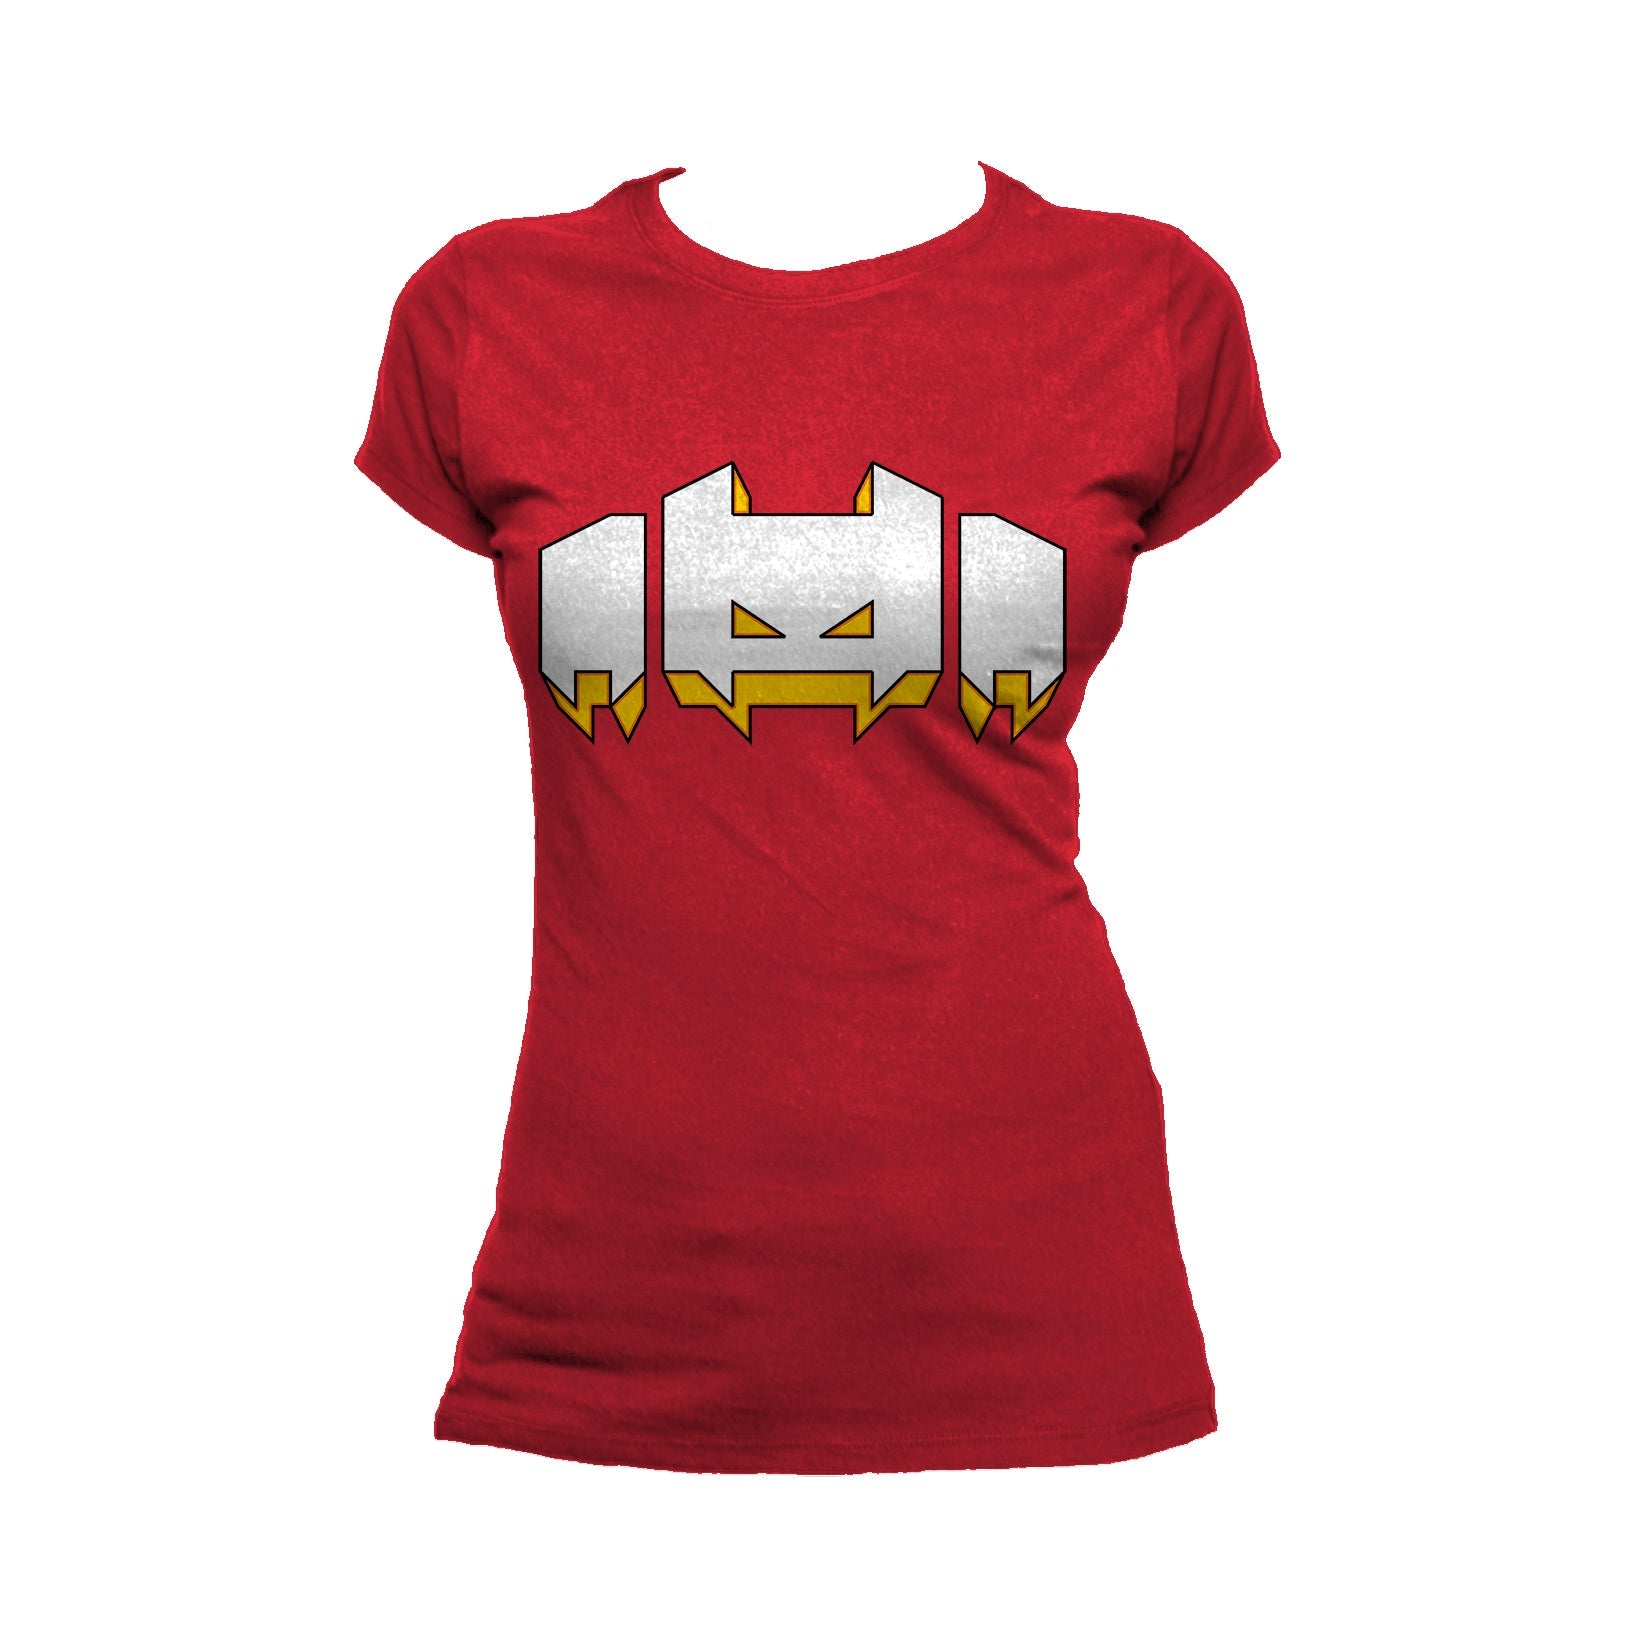 US Brand X Sci Funk Hungry Invader Official Women's T-Shirt ()